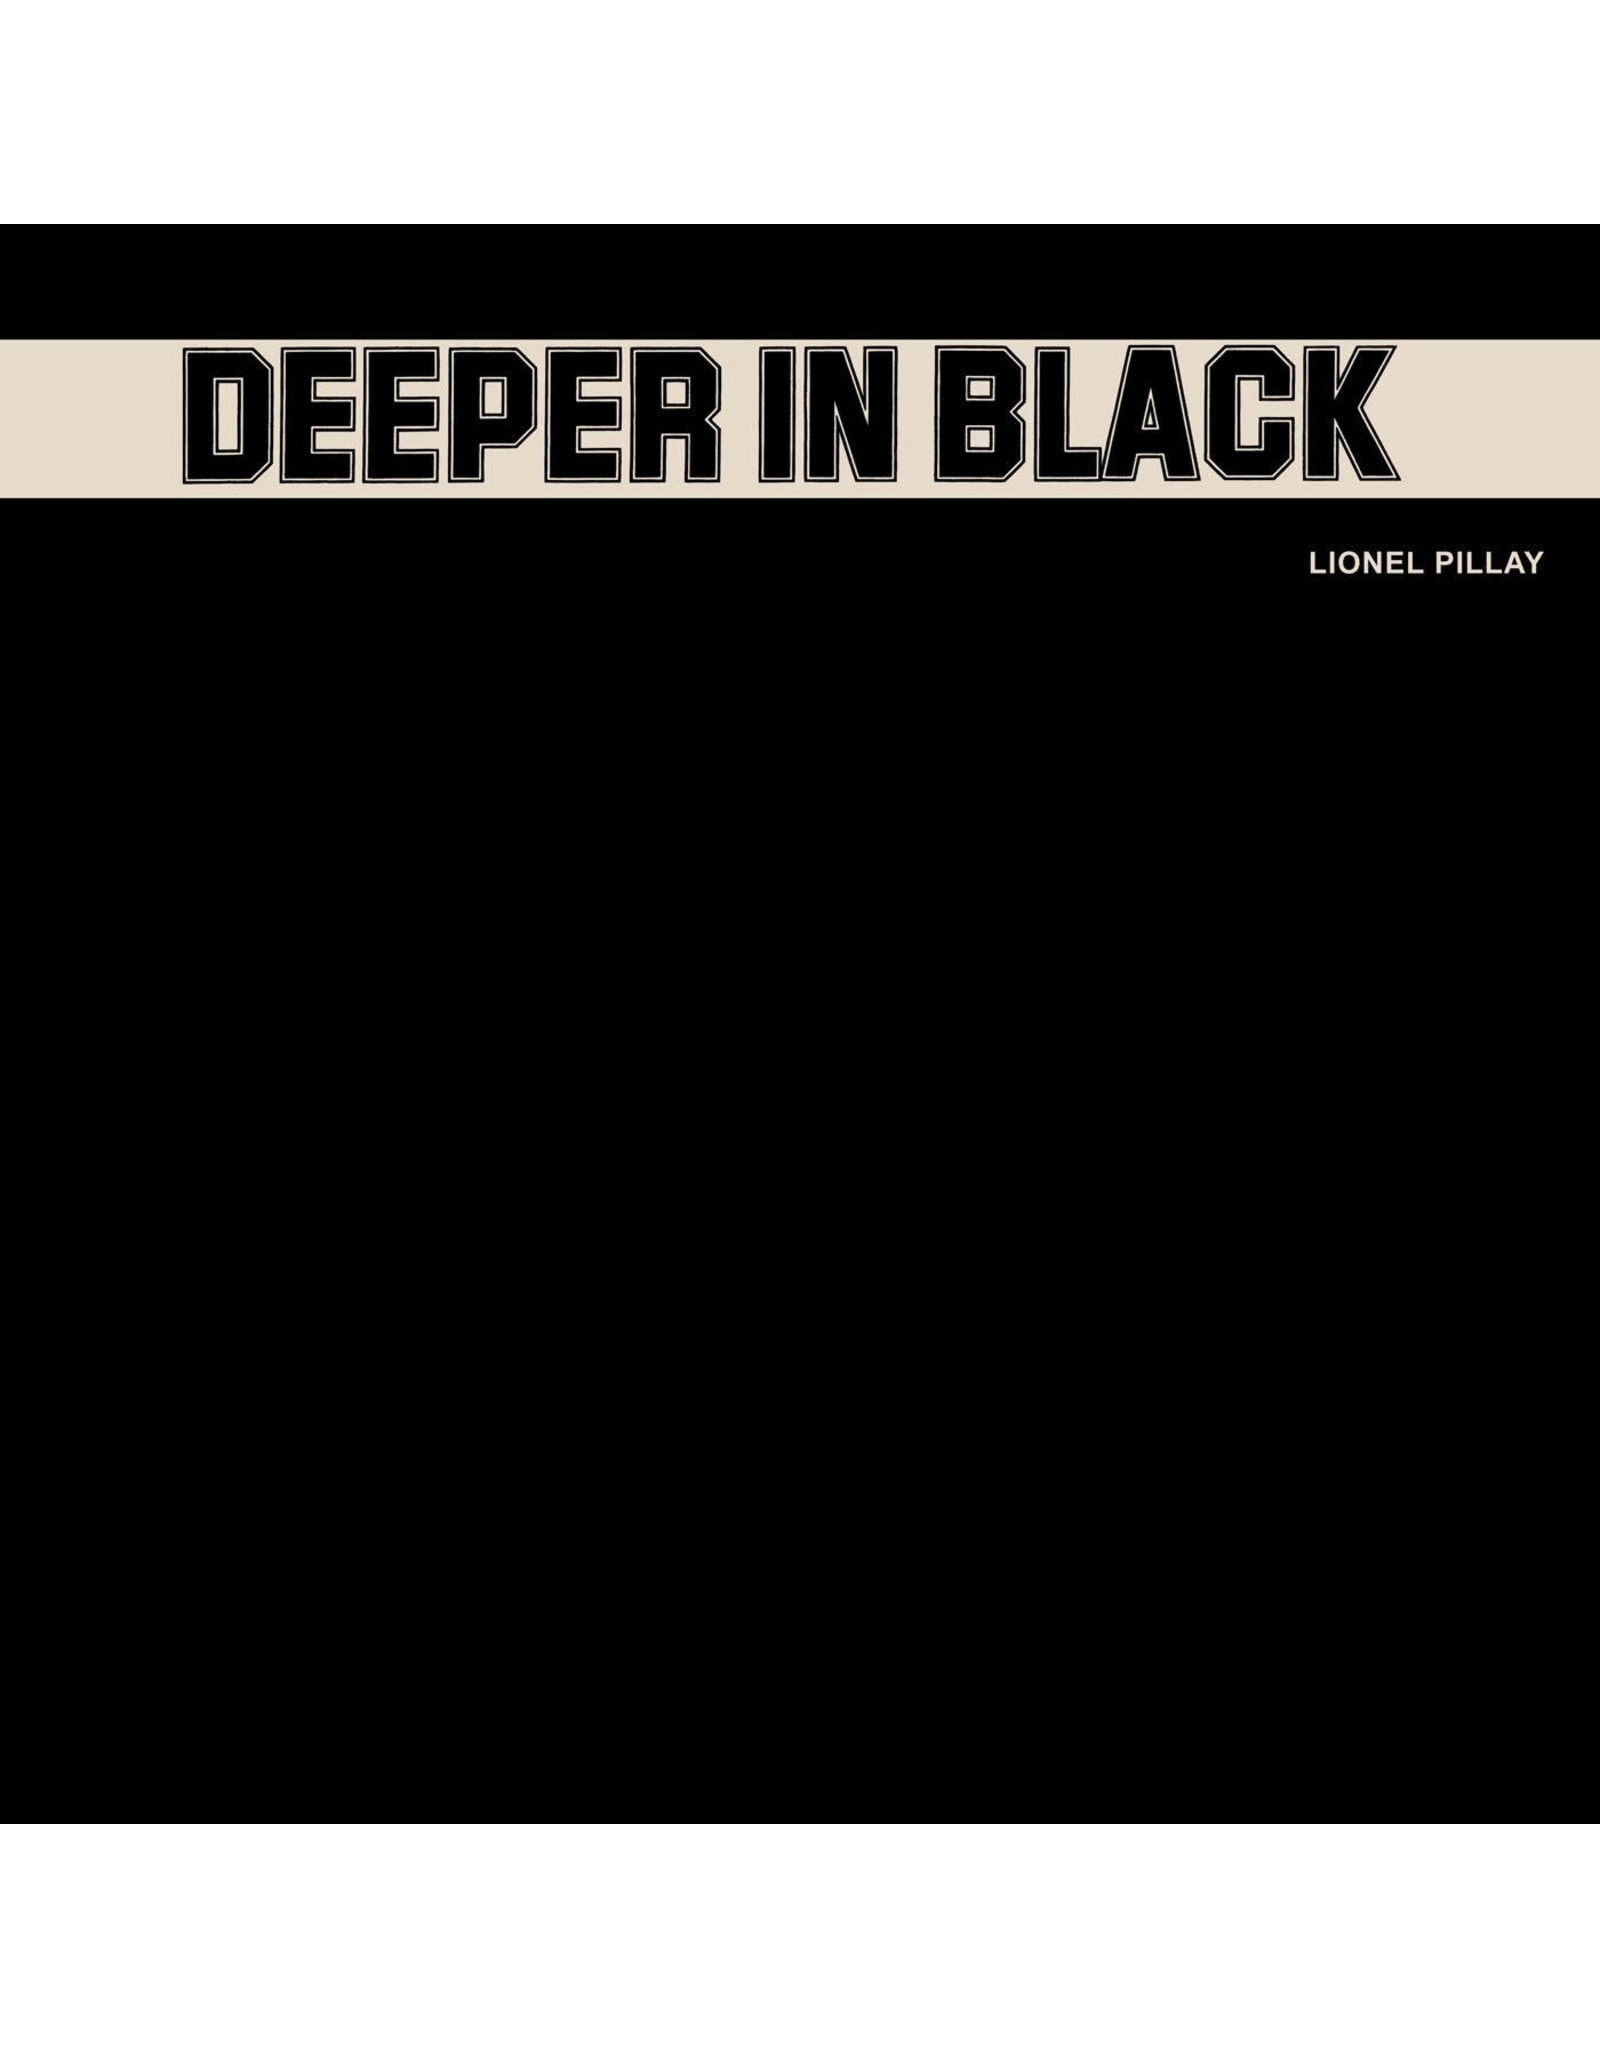 We Are Busy Bodies Pillay, Lionel: Deeper in Black LP